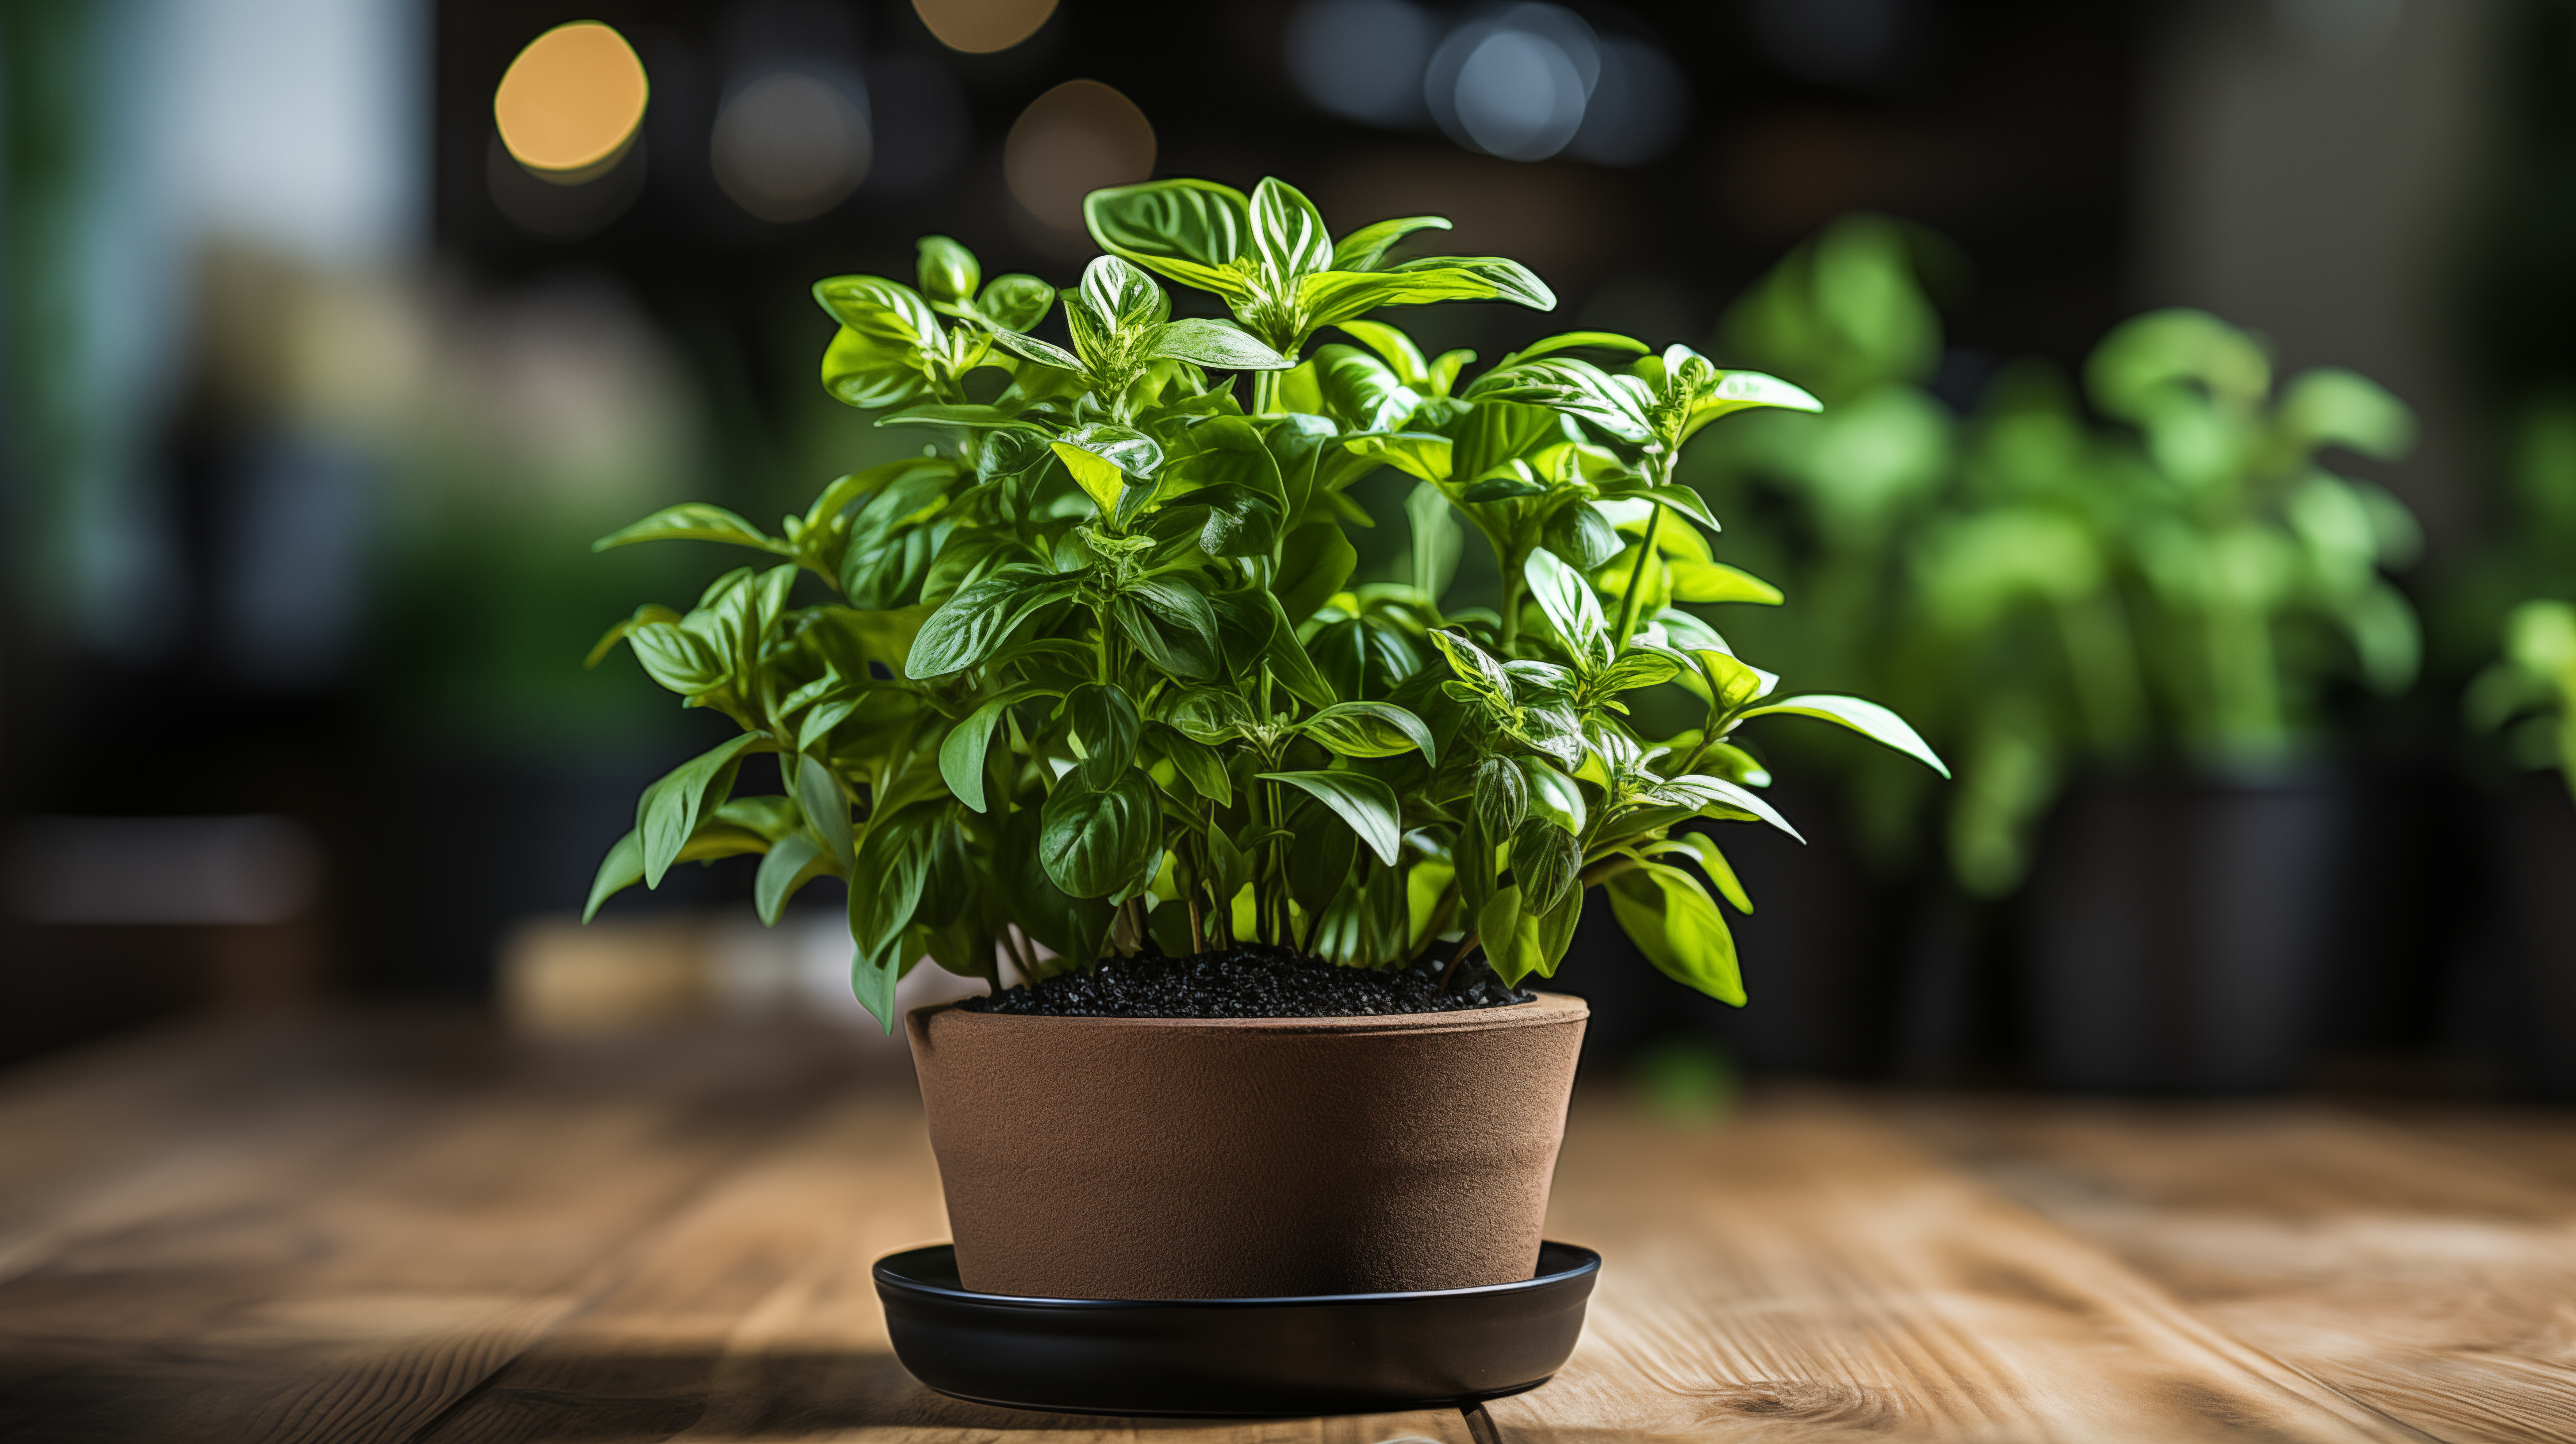 Lush green basil plant in a brown pot, set on a wooden table with a soft-focus backdrop, perfect for an HD desktop wallpaper with a botanical theme.